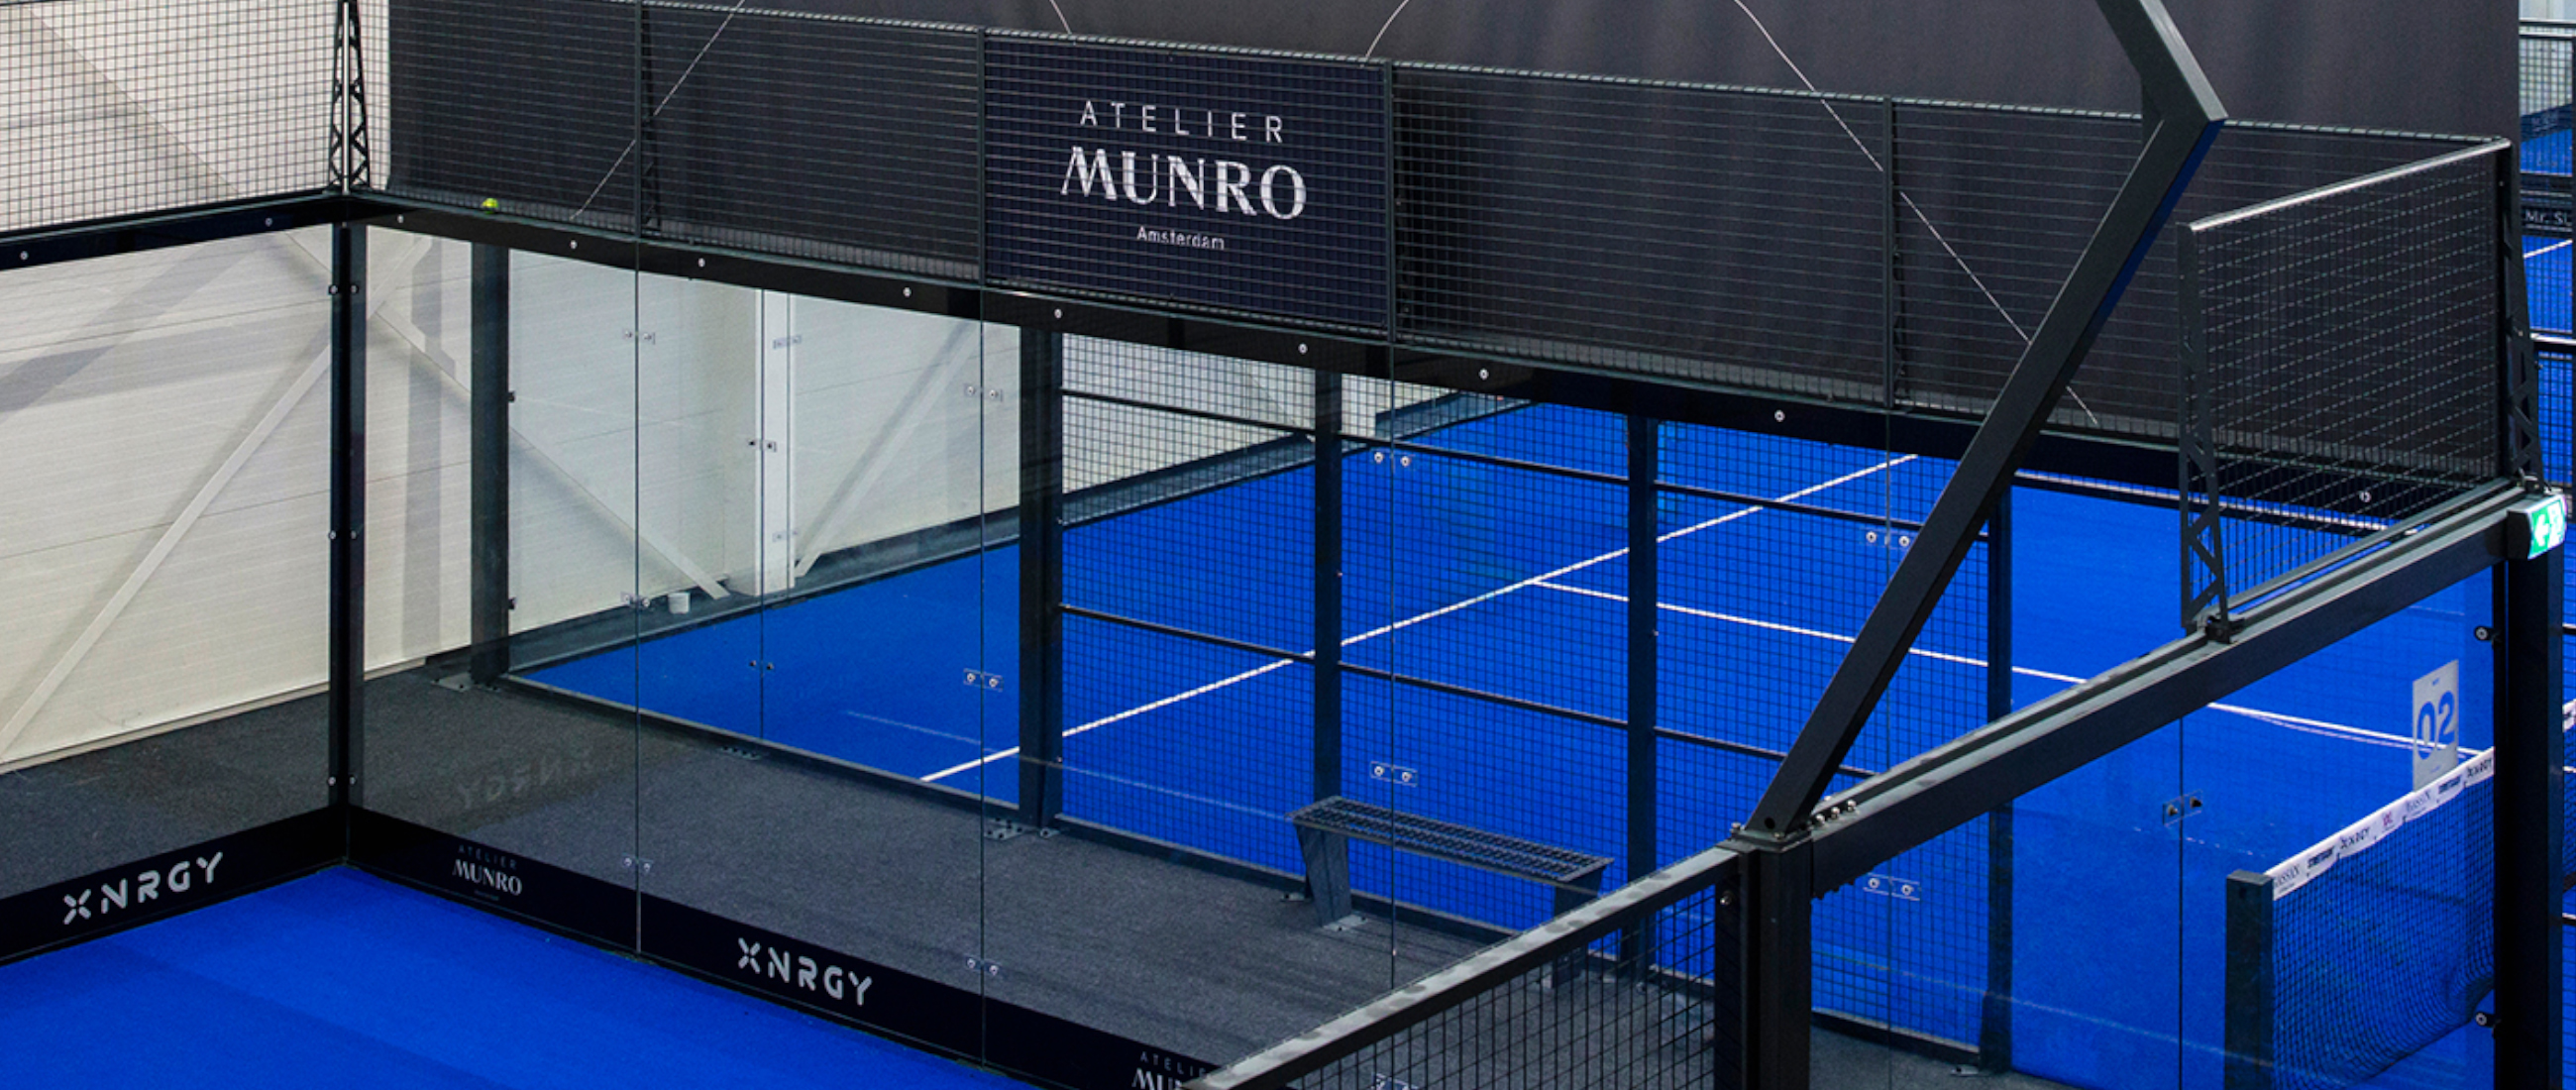 Teaming up with two of the most exciting names on the Dutch padel scene